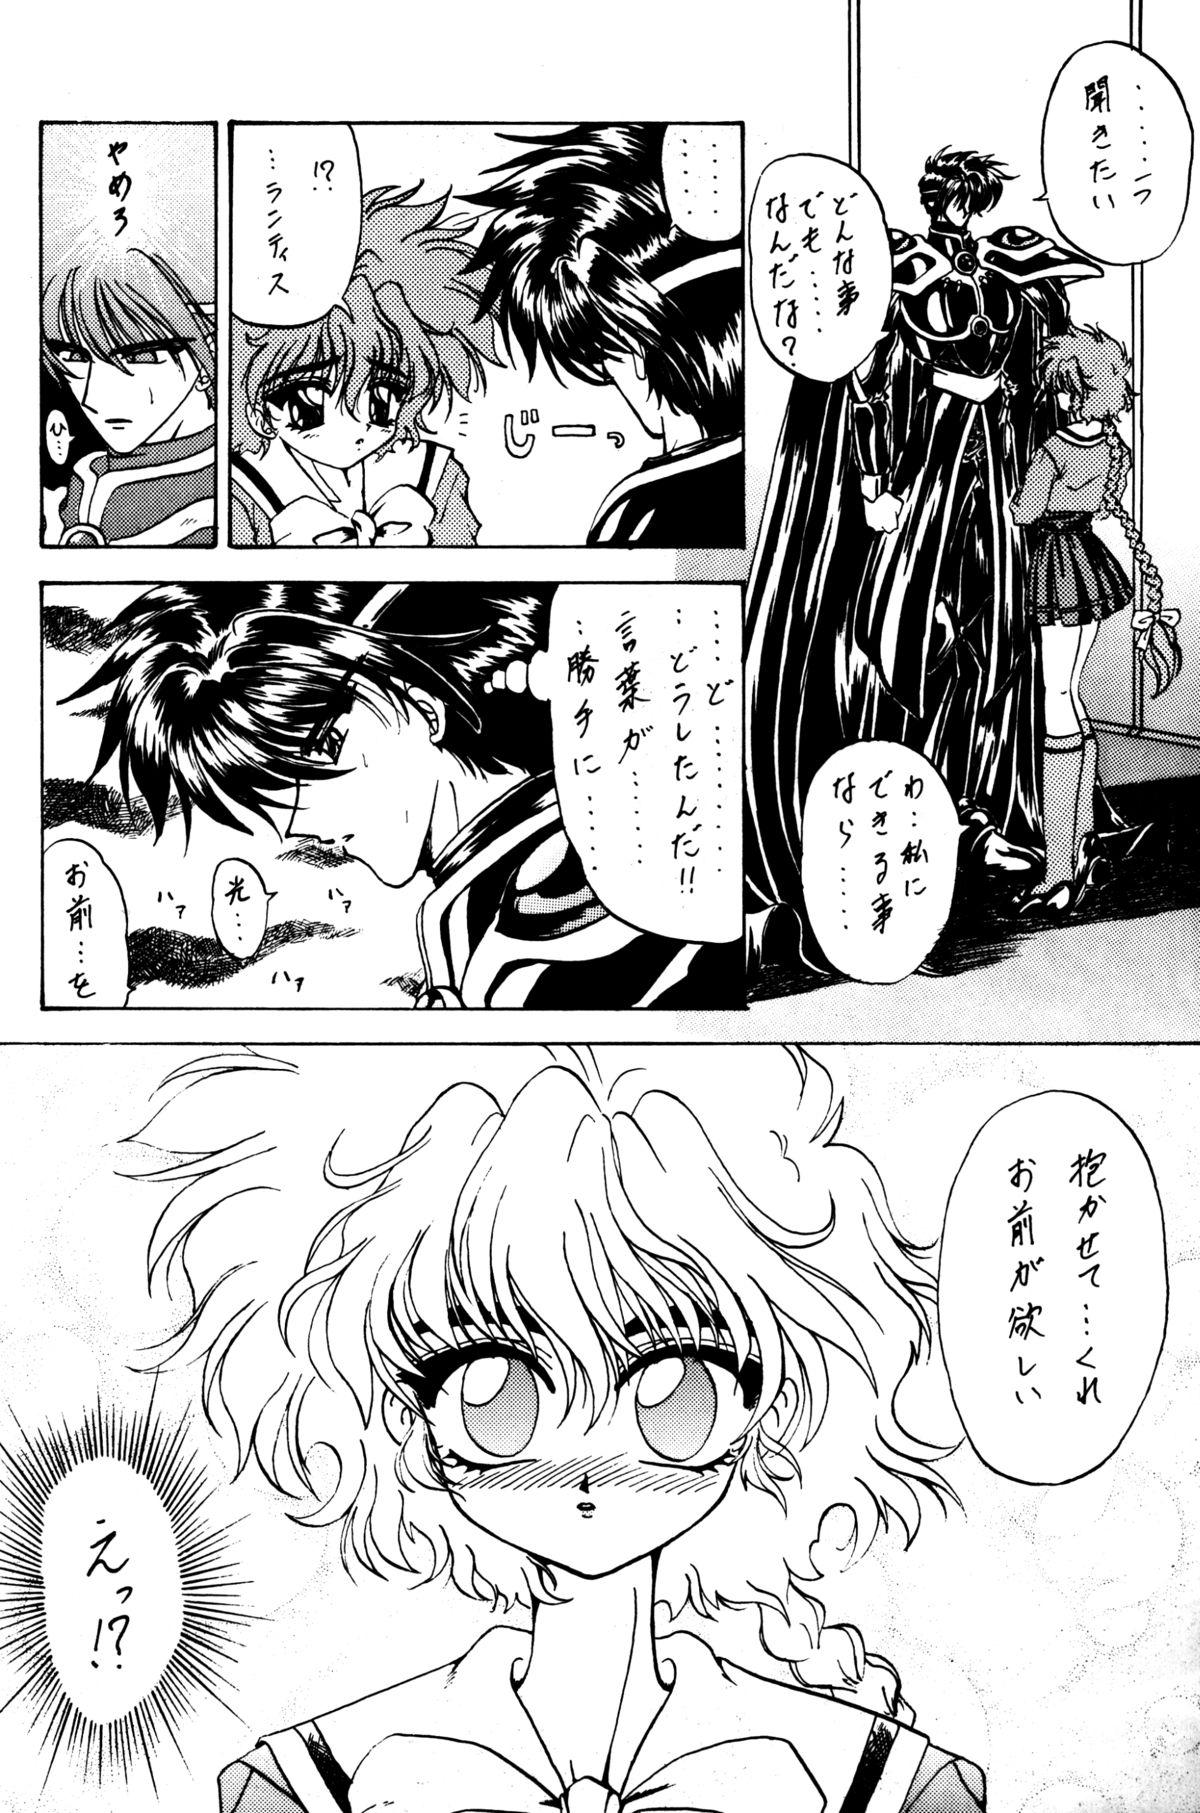 Petite Girl Porn Stale World II - Magic knight rayearth Ejaculation - Page 7